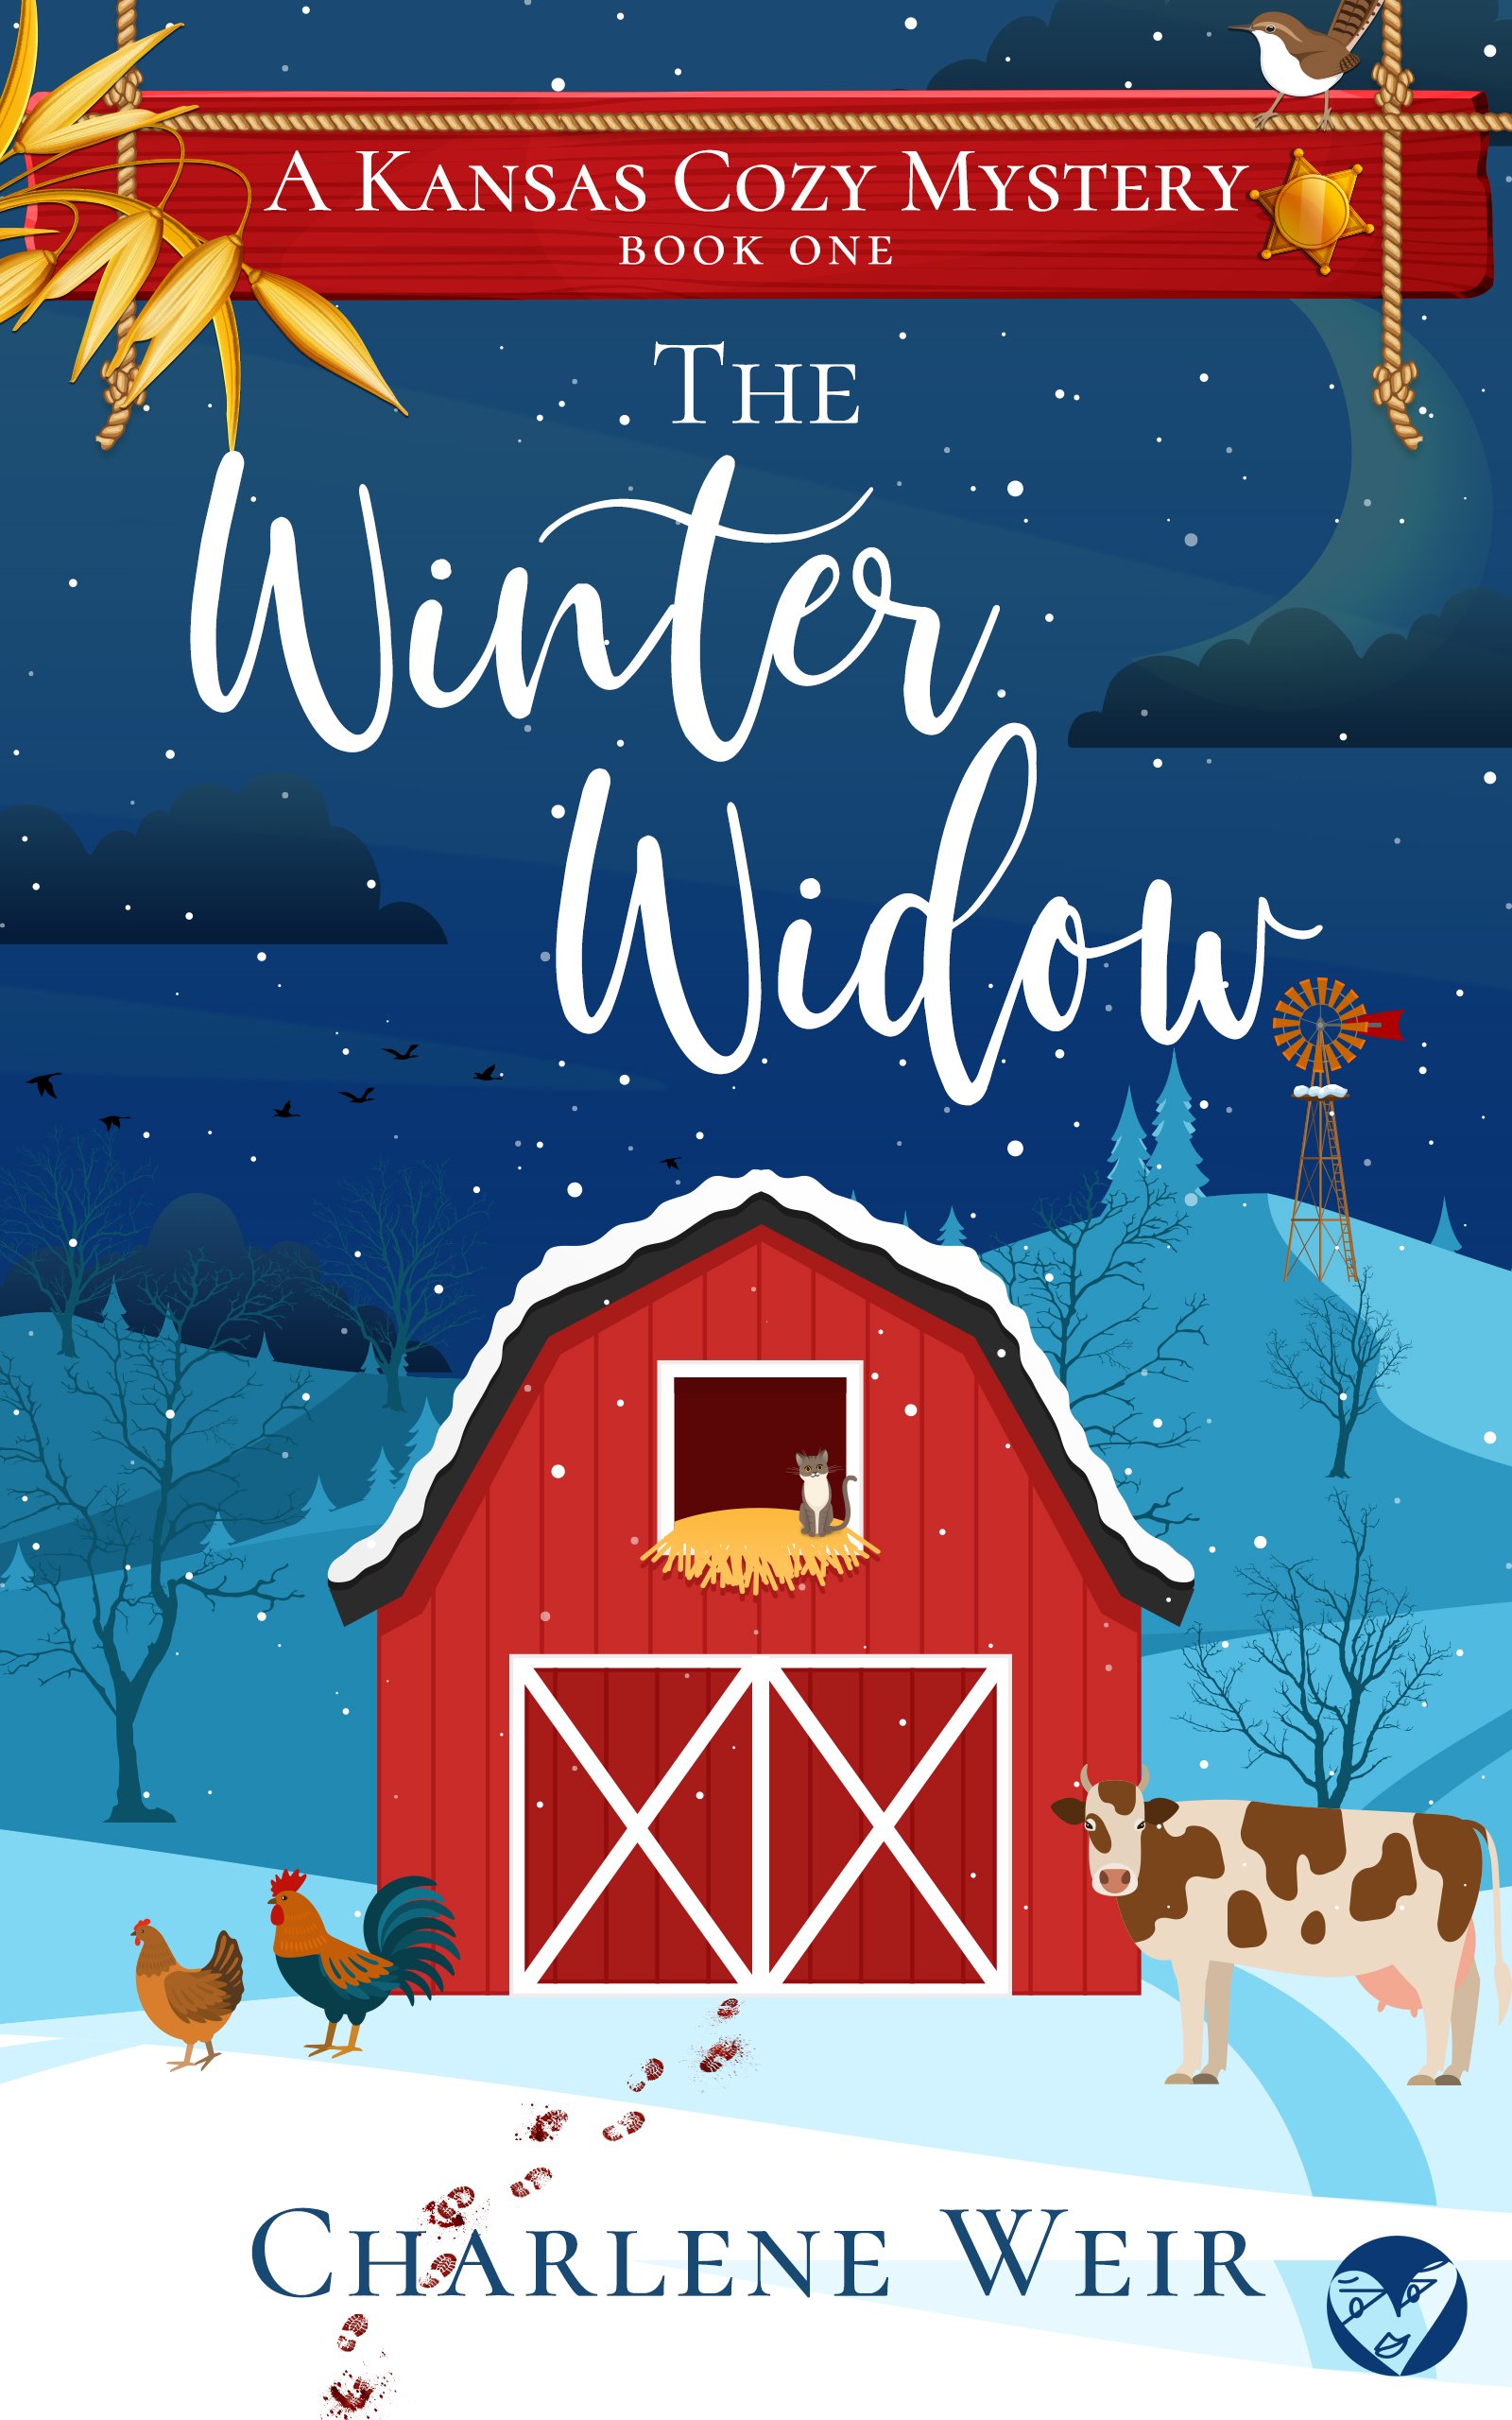 THE WINTER WIDOW cover publish.jpg